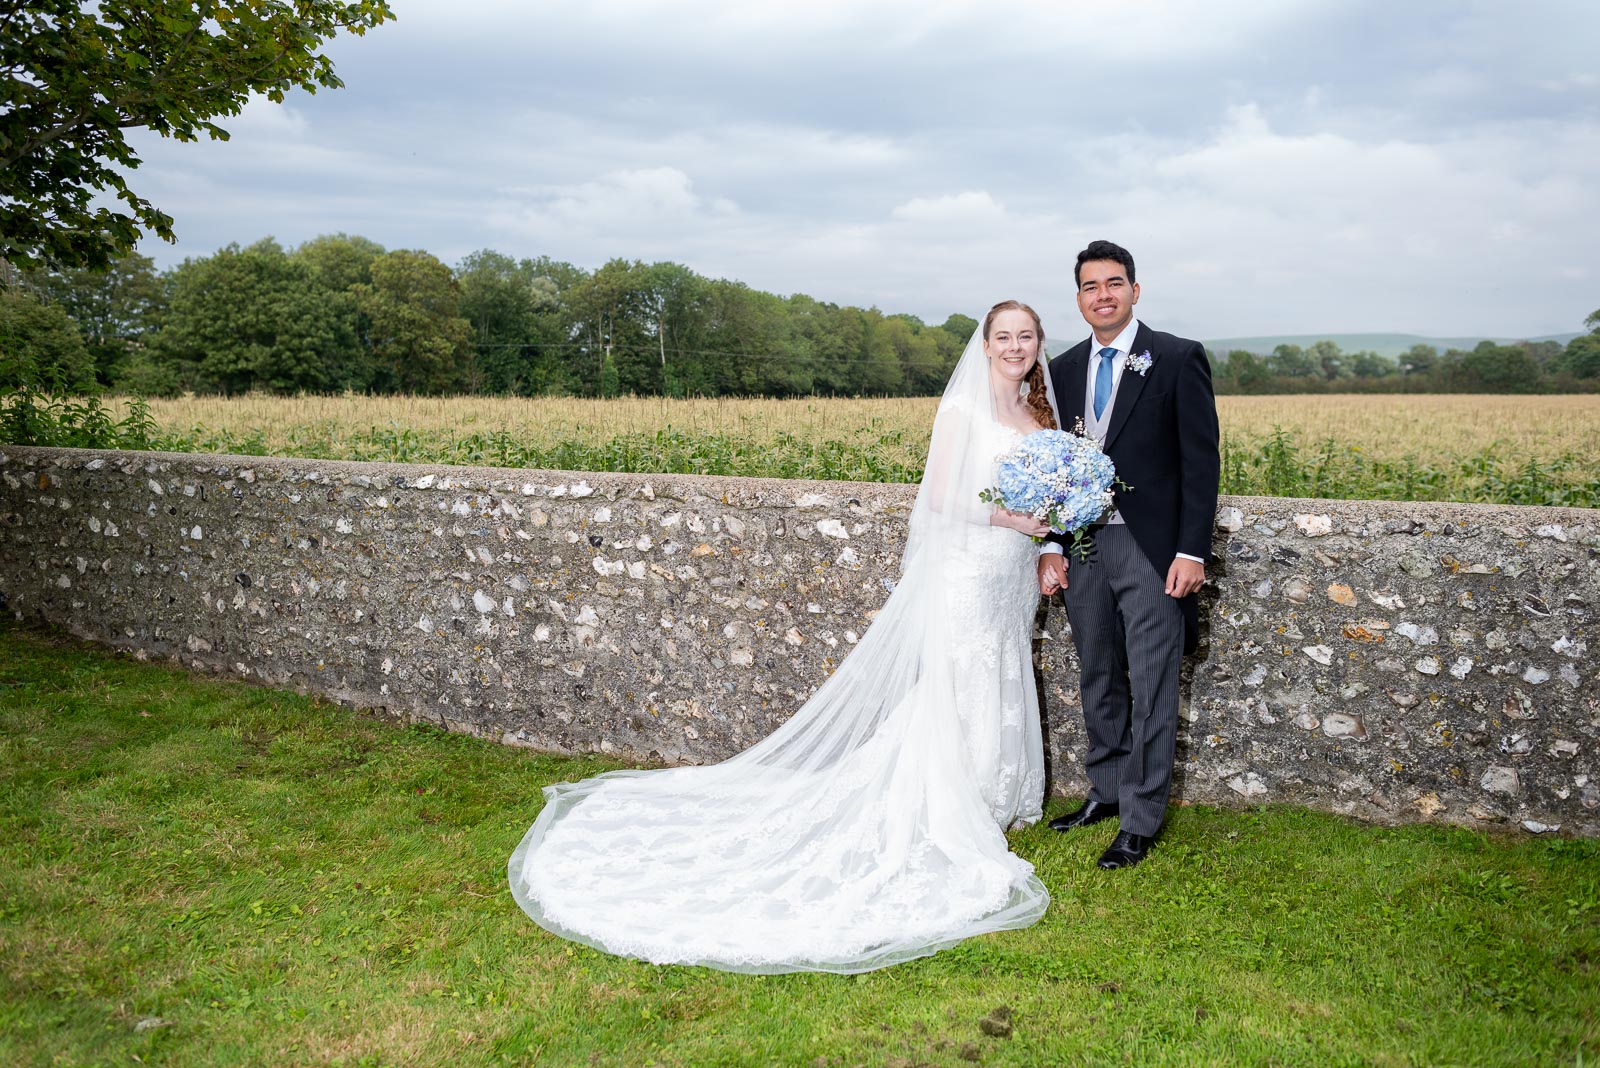 Lily and Callum pose with the downs in the background after getting married at St Nicholas Church in Iford.